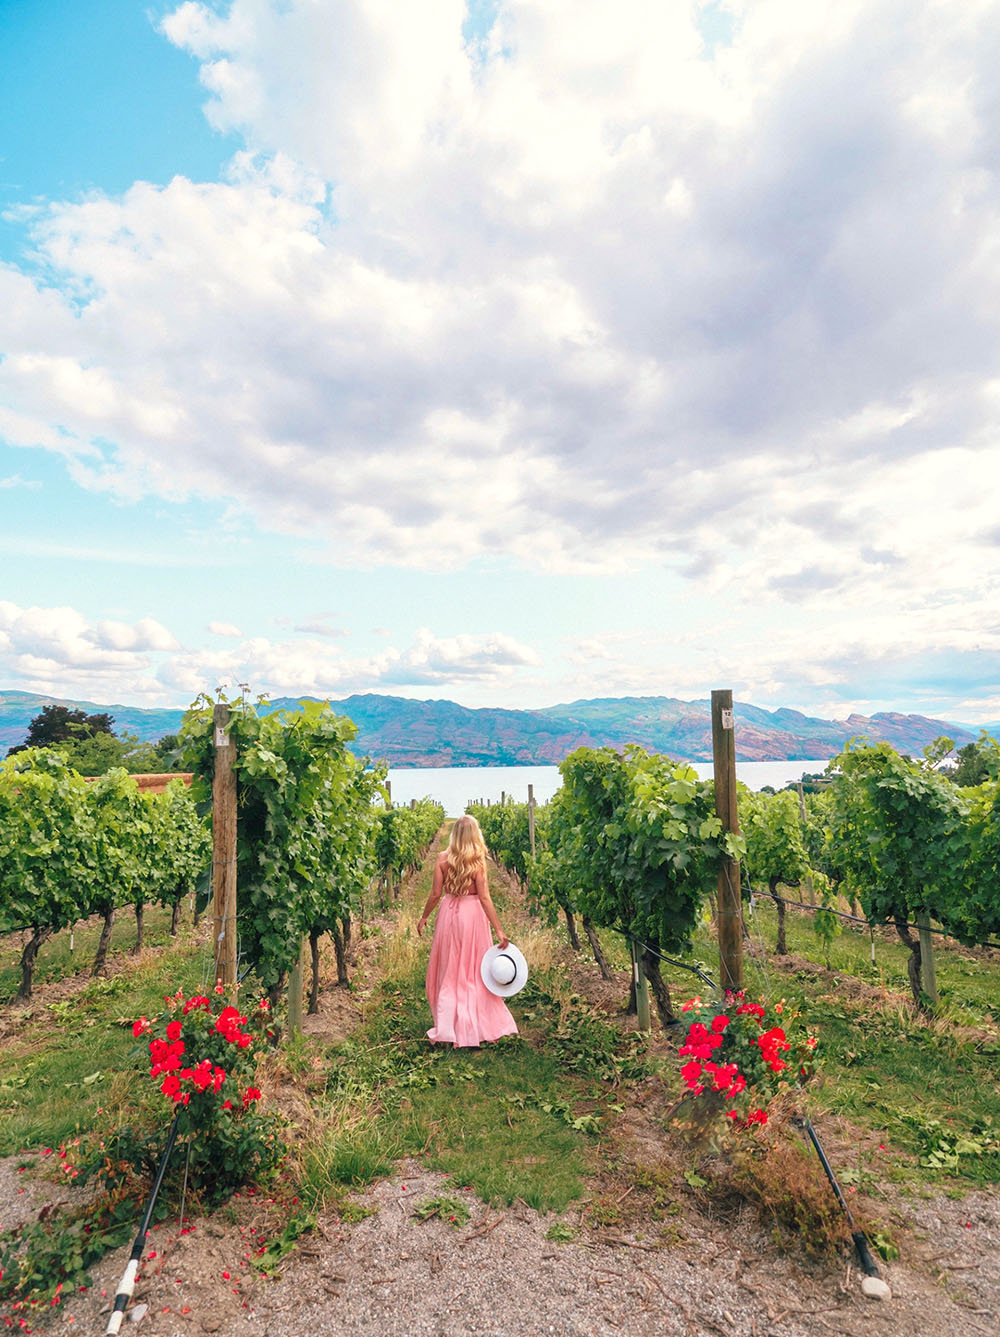 Looking for the best wineries in Kelowna for lunch? This guide is for you! Here's a list of the best Kelowna wineries with restaurants to enjoy an amazing lunch with wine in the sun. Pictured here: Quails Gate Estate Winery